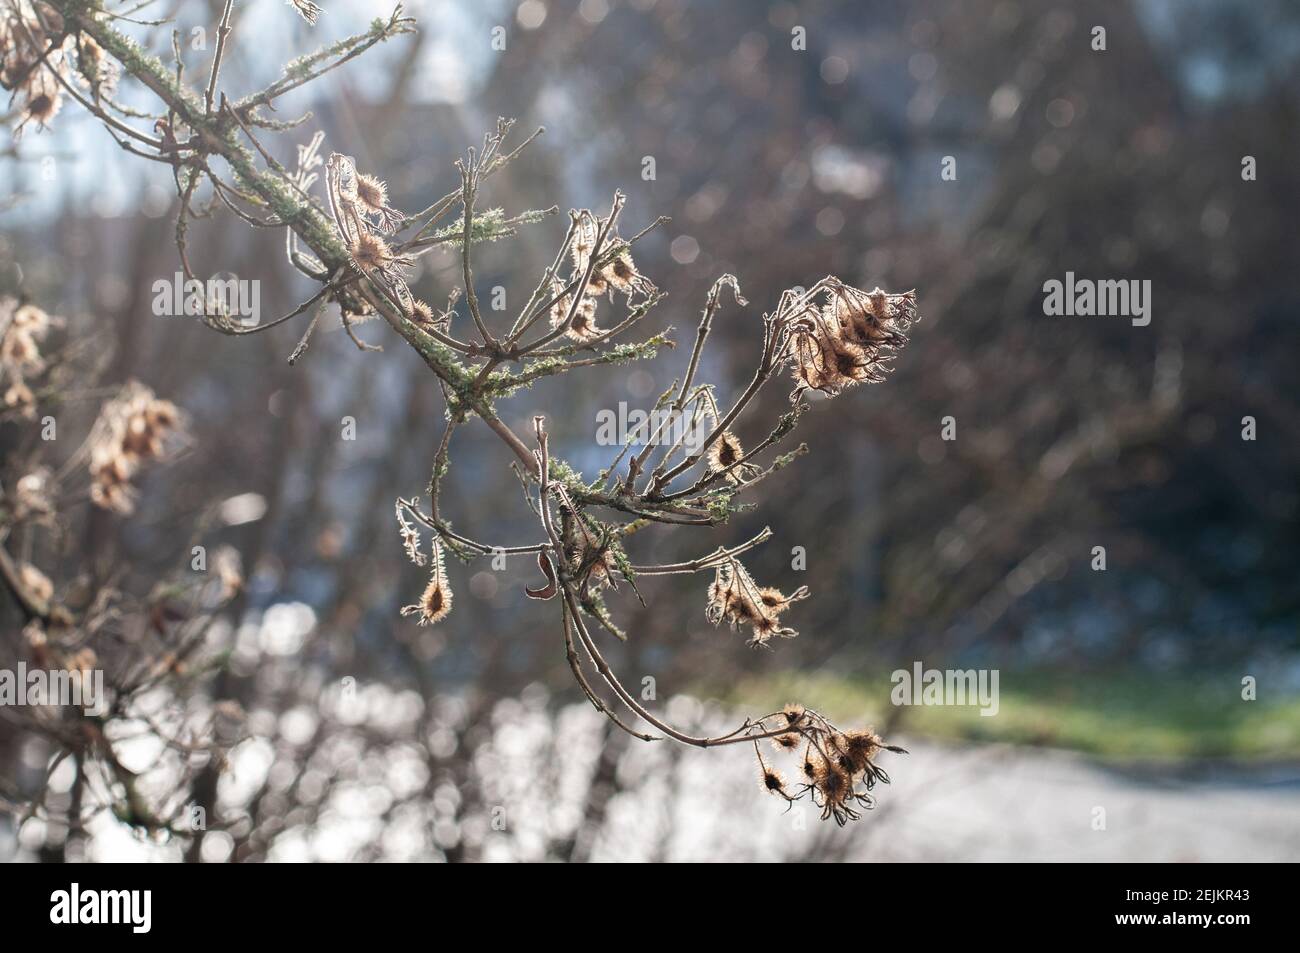 close-up of the hairy wilted flowers of a kolkwitzia shrub in morning sunlight in winter Stock Photo